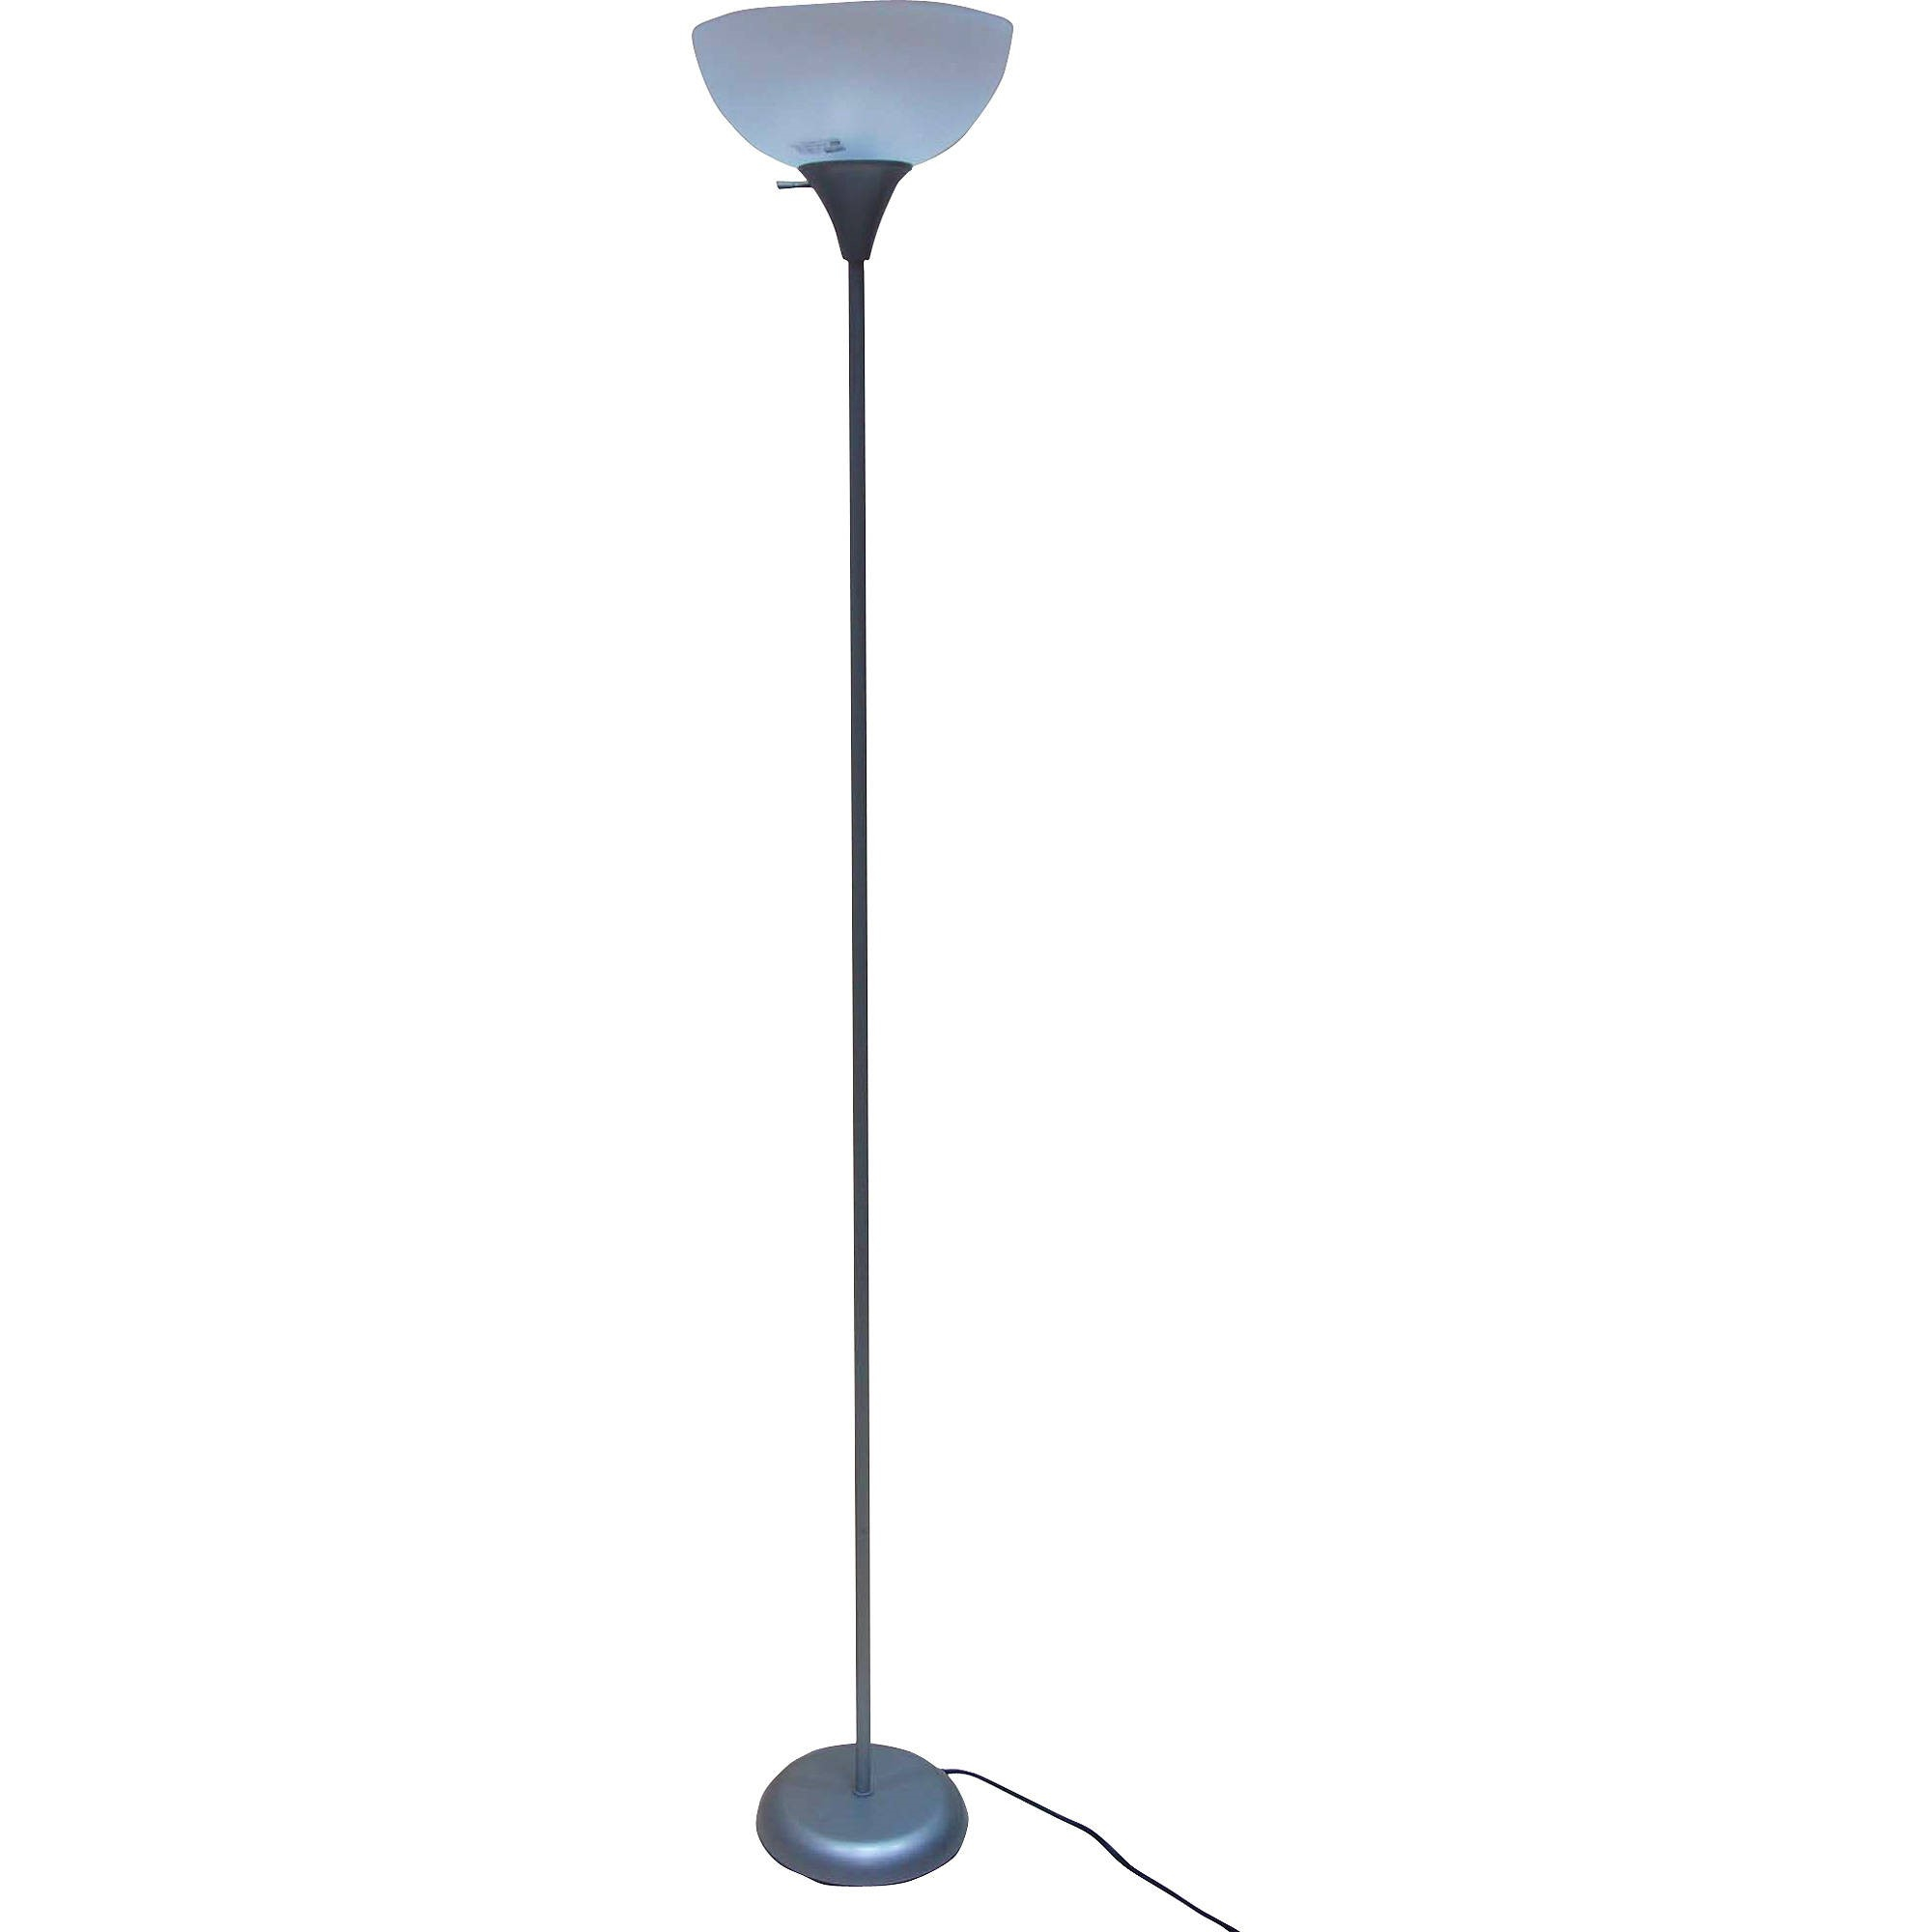 Mainstays 71 Metal Floor Lamp Silver Walmart intended for size 2000 X 2000